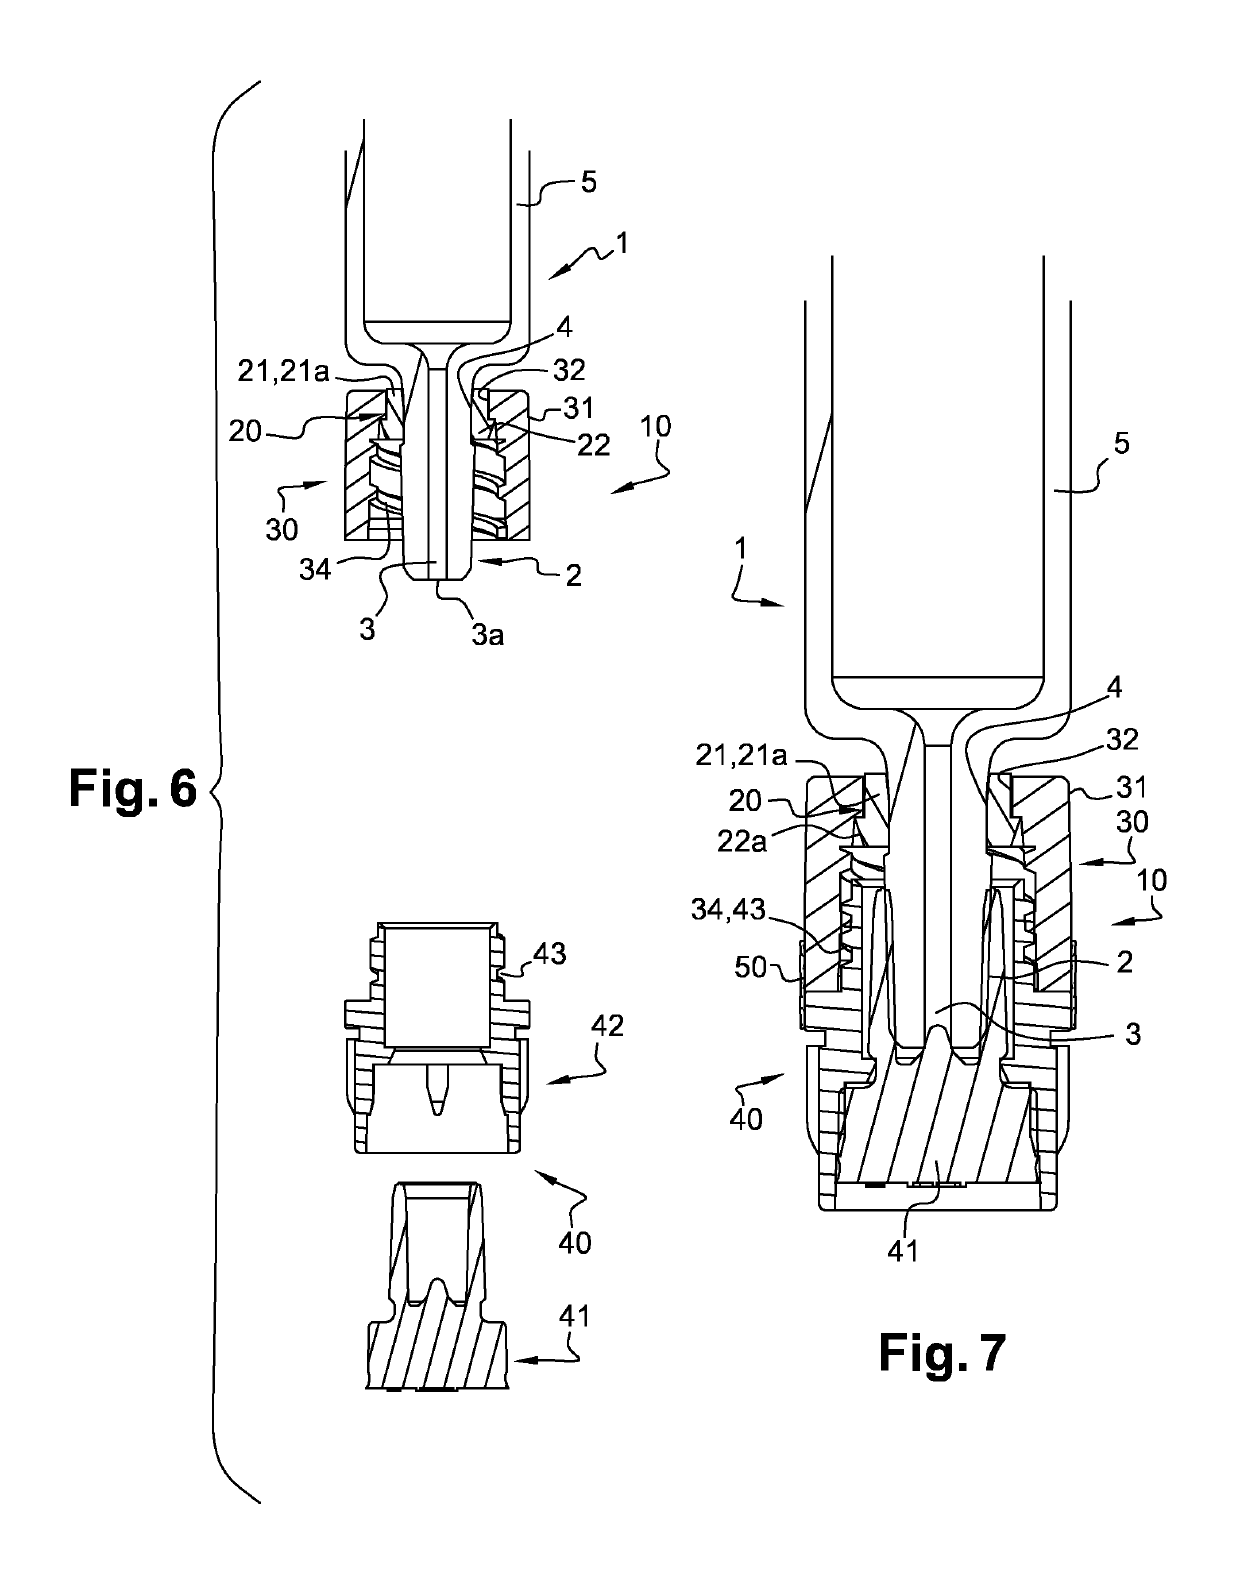 Adaptor for a drug delivery device and method for mounting said adaptor thereon